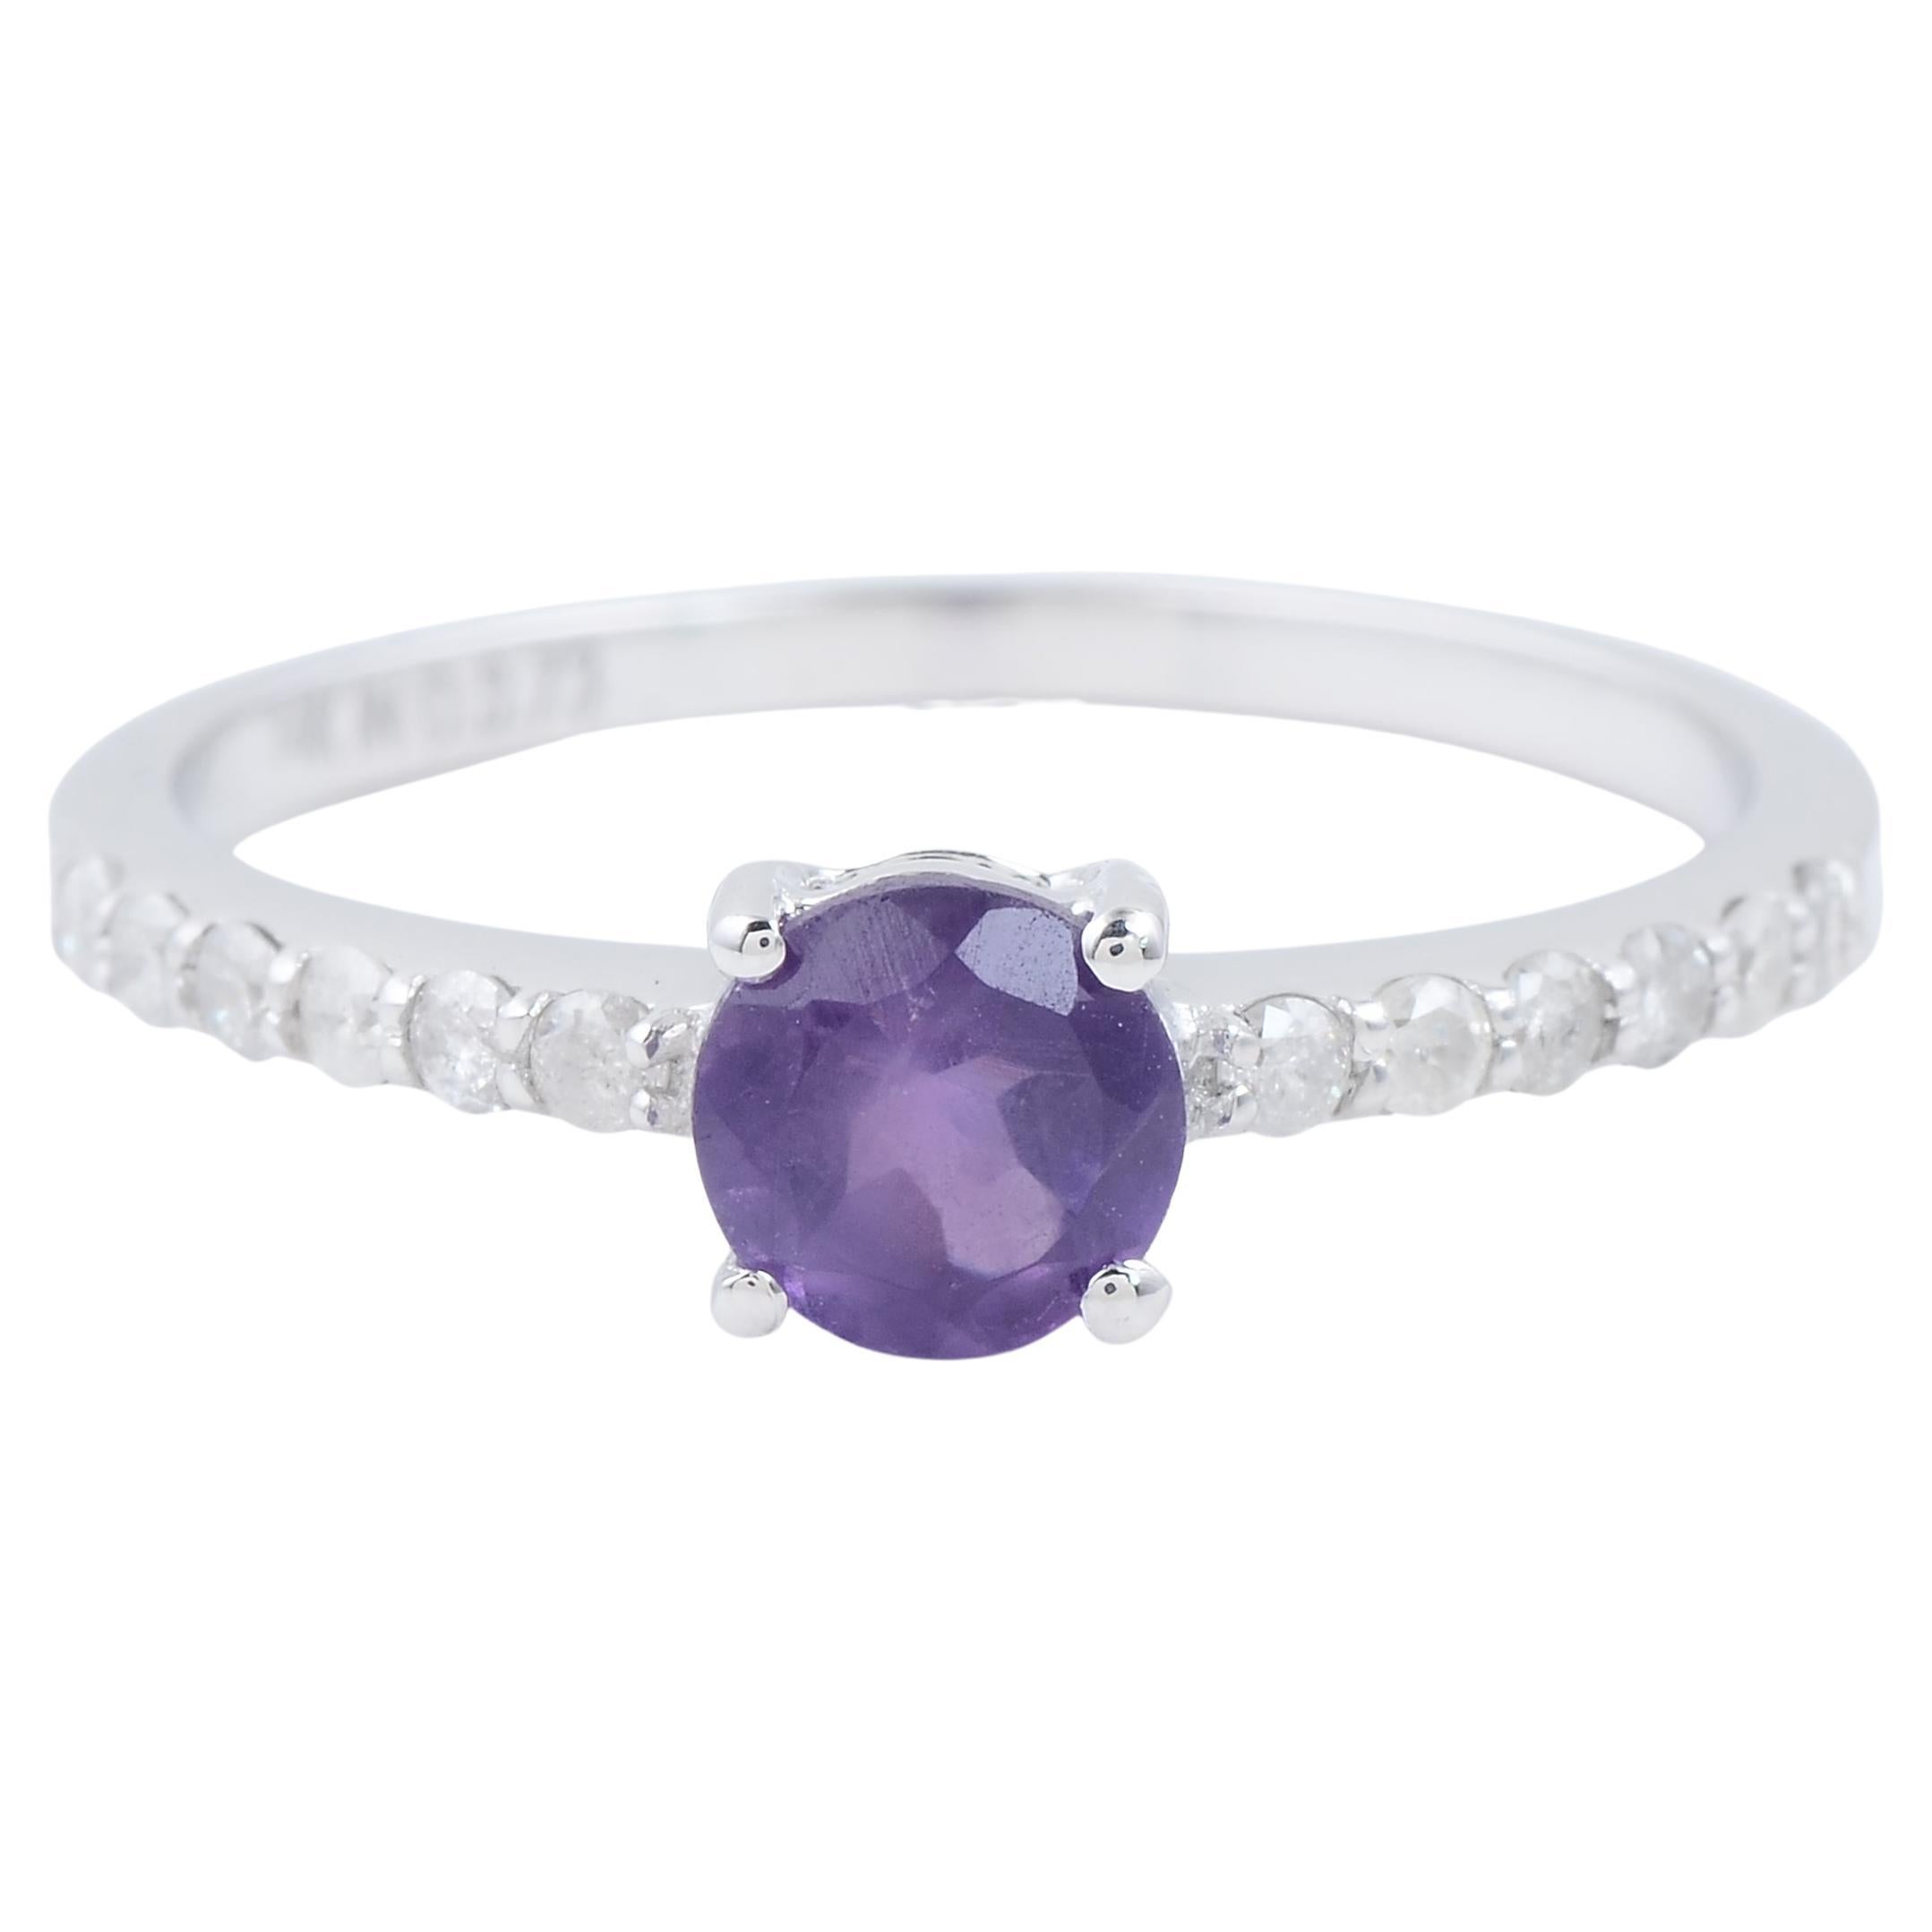 Luxurious 14K Amethyst & Diamond Cocktail Ring, Size 6.75 - Statement Jewelry For Sale